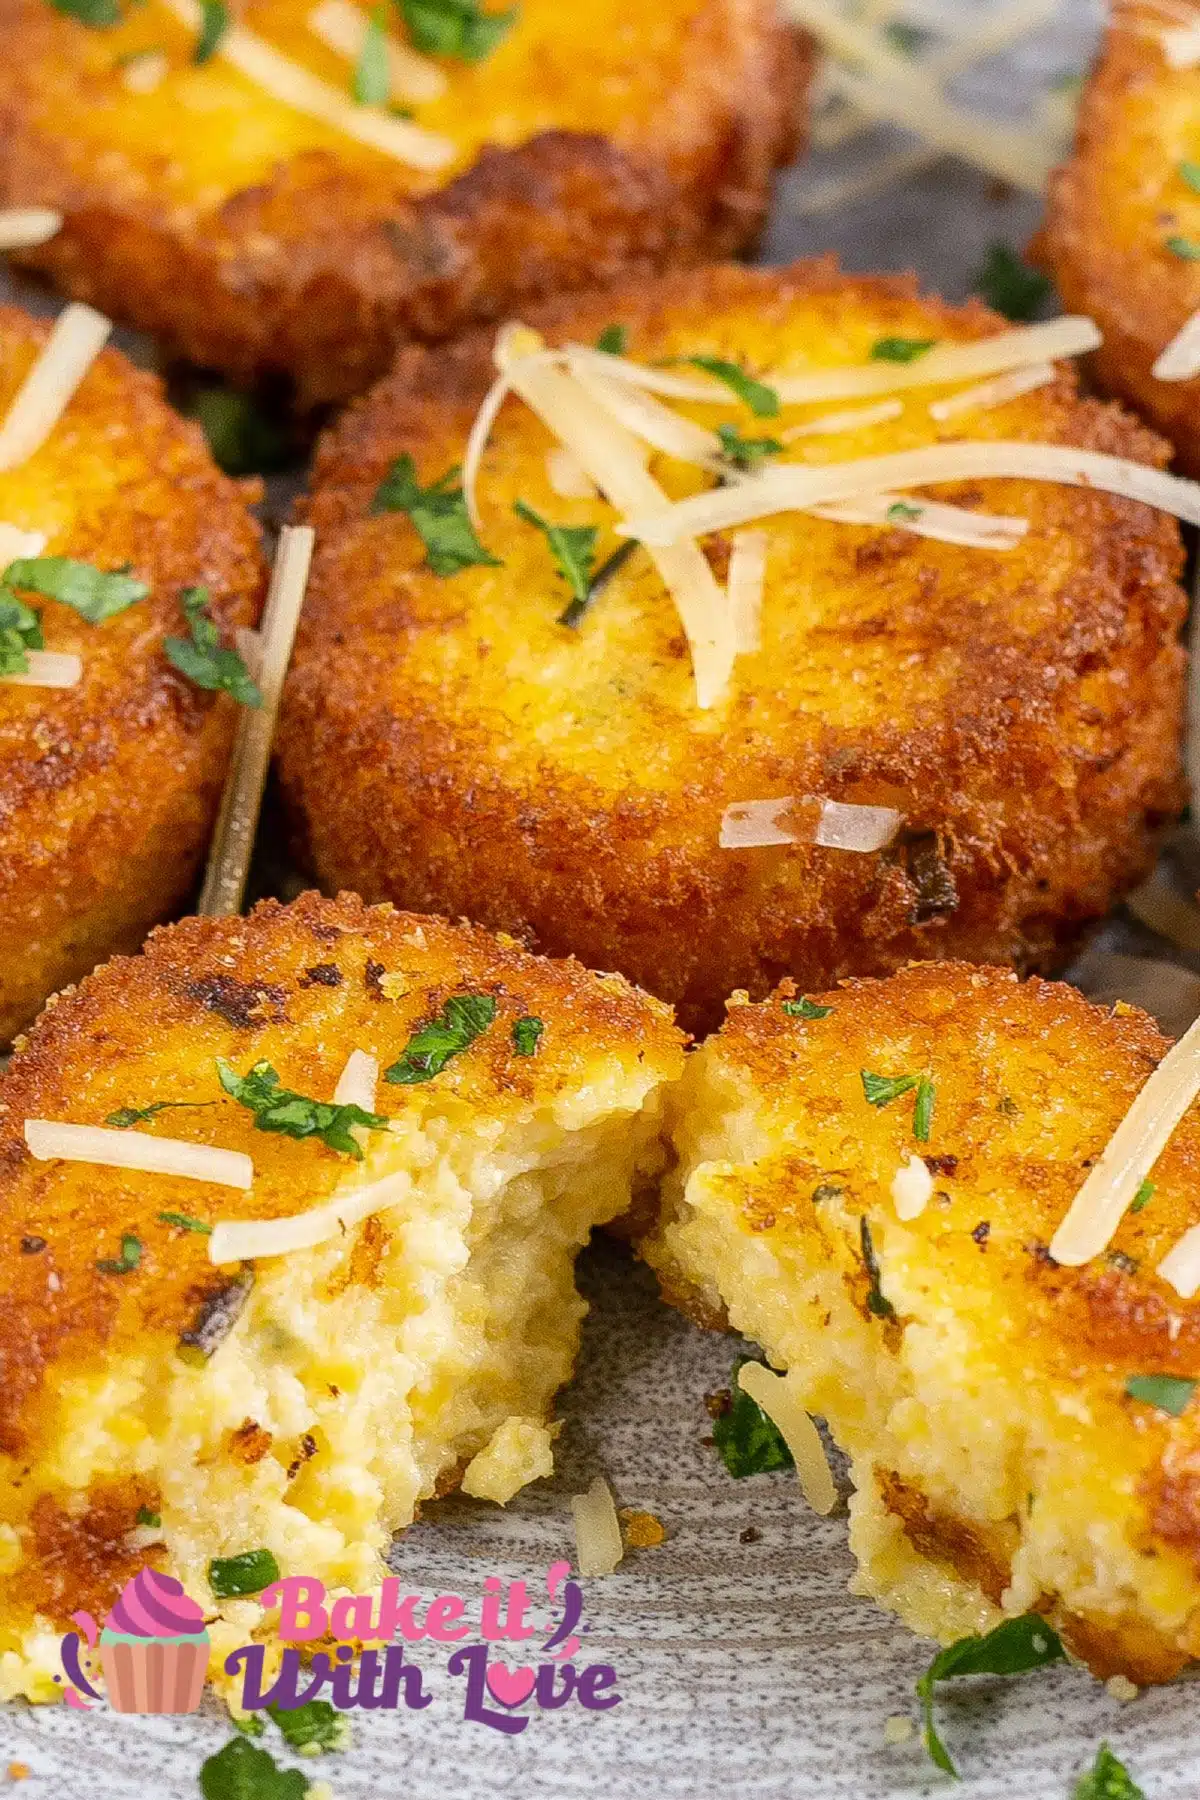 Closeup on the golden fried polenta cakes cut open to show the tender filling.